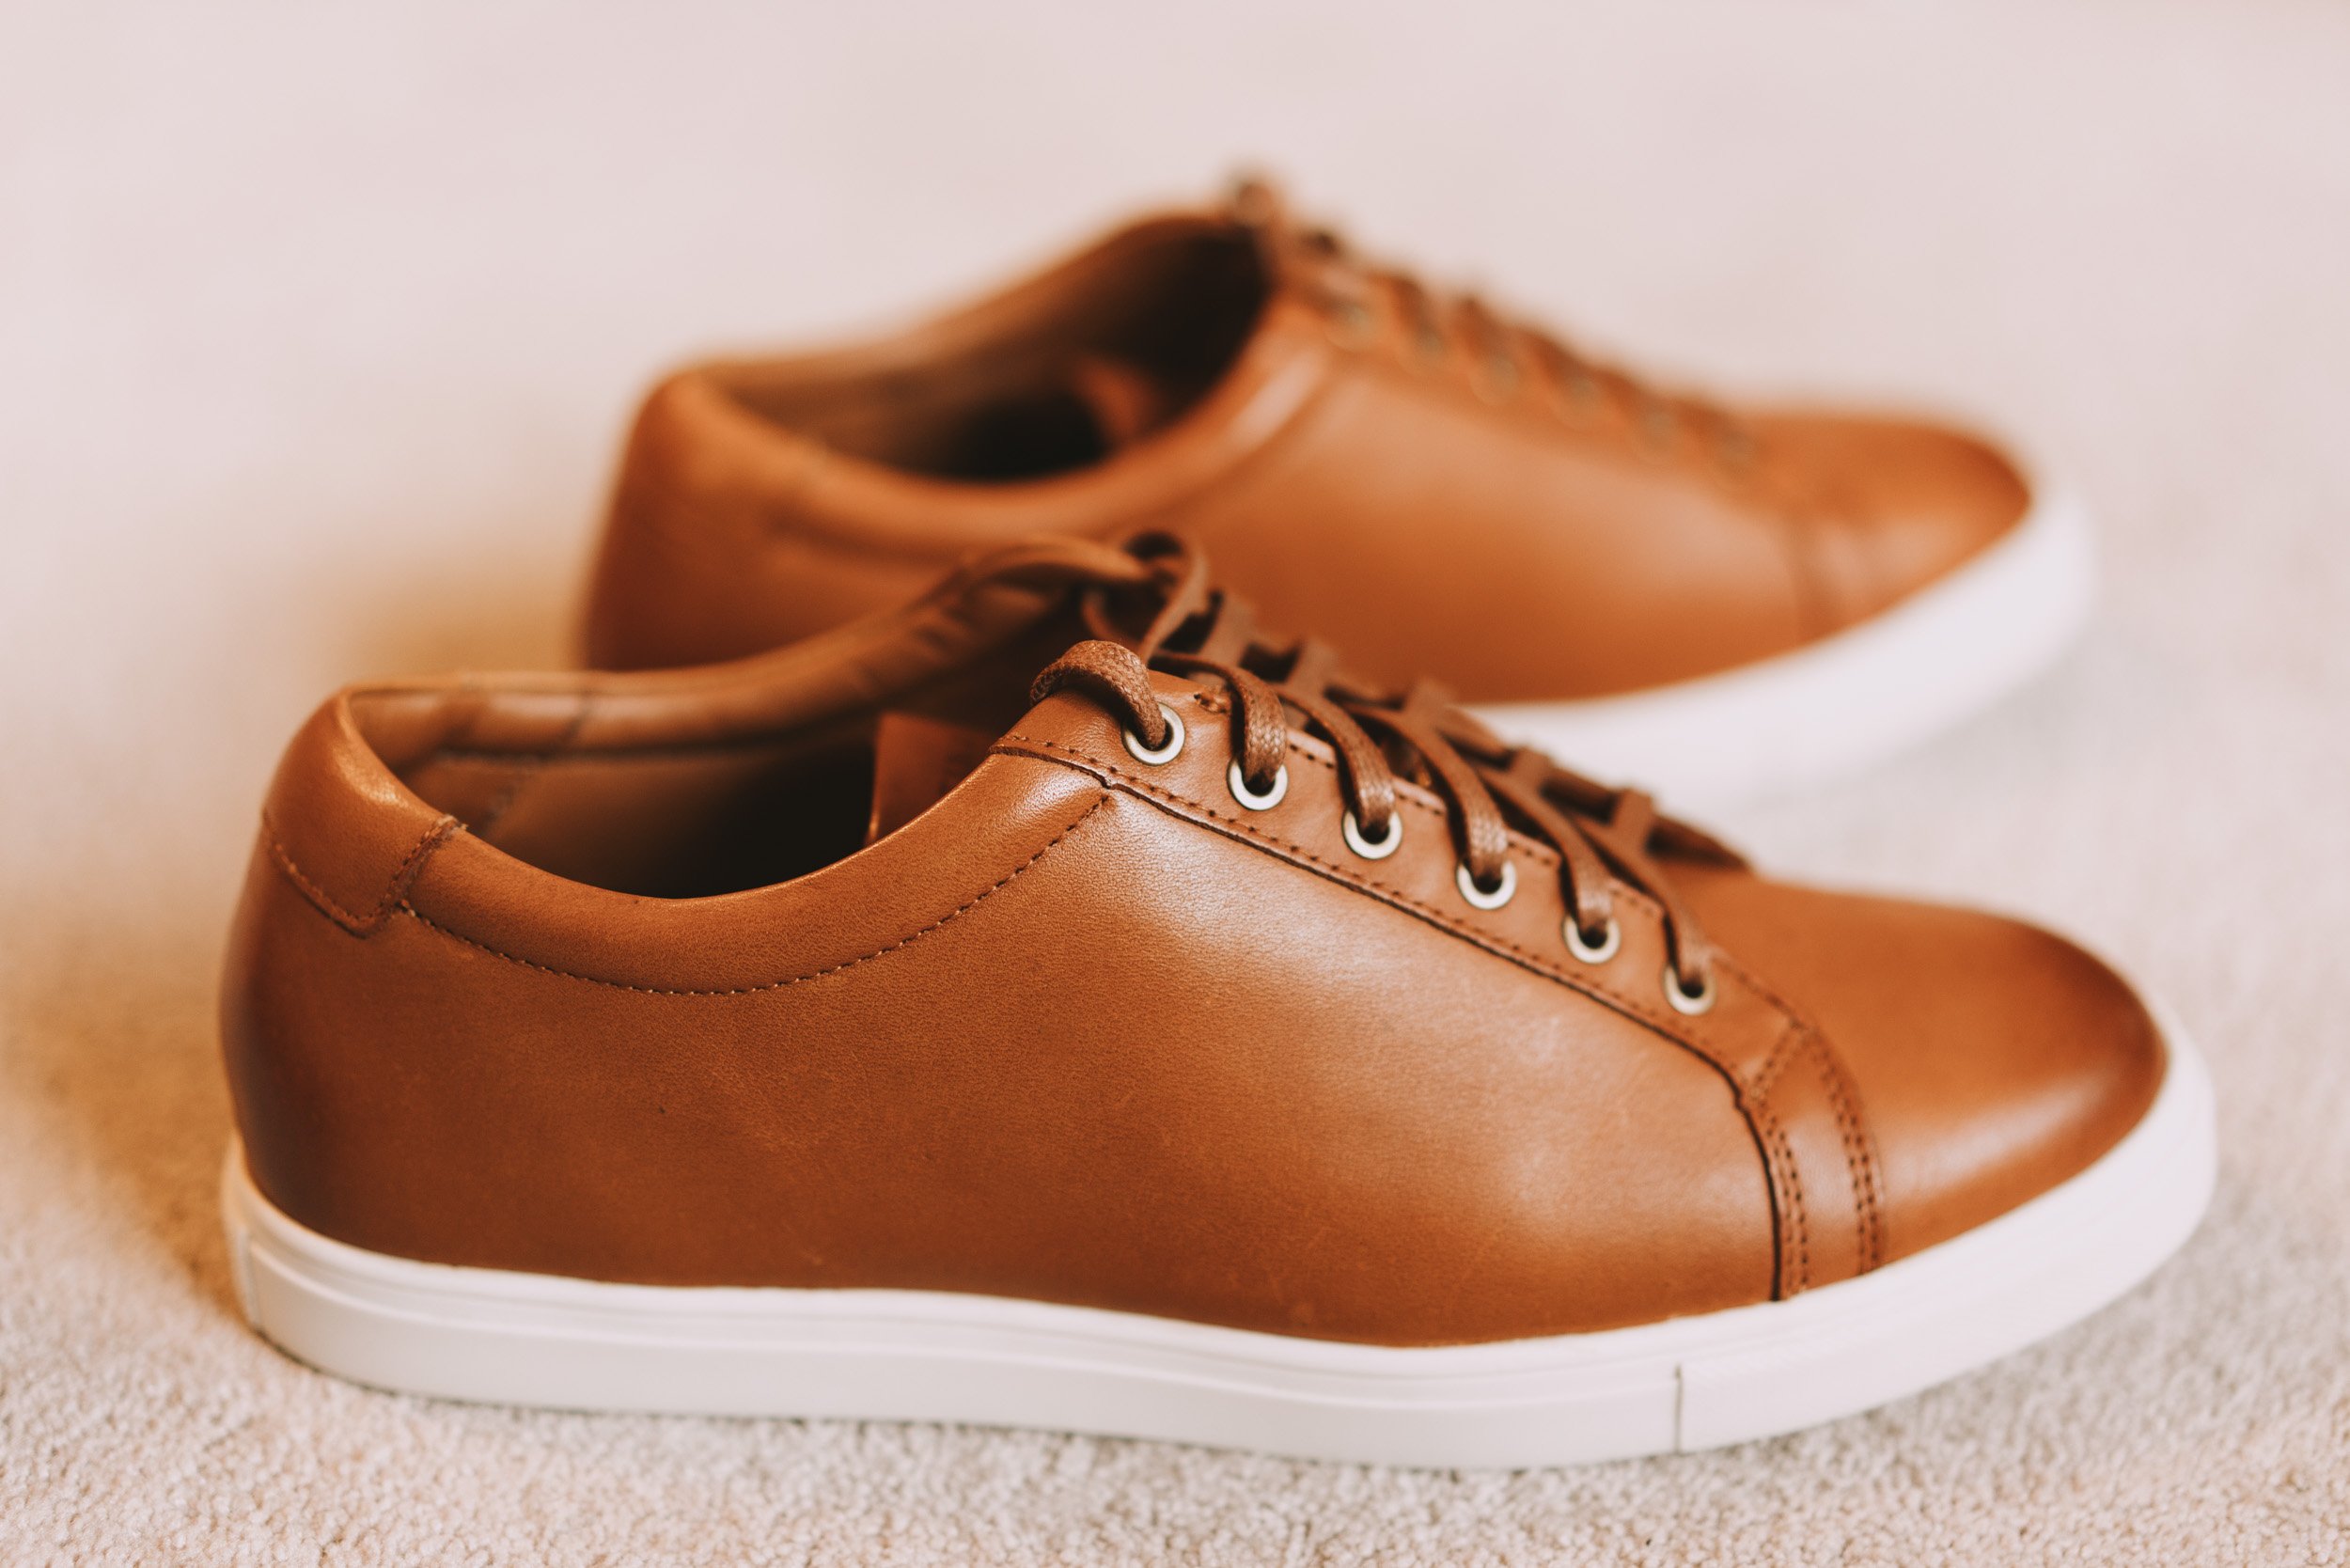 Can Portland Leather Goods Make Great Shoes?